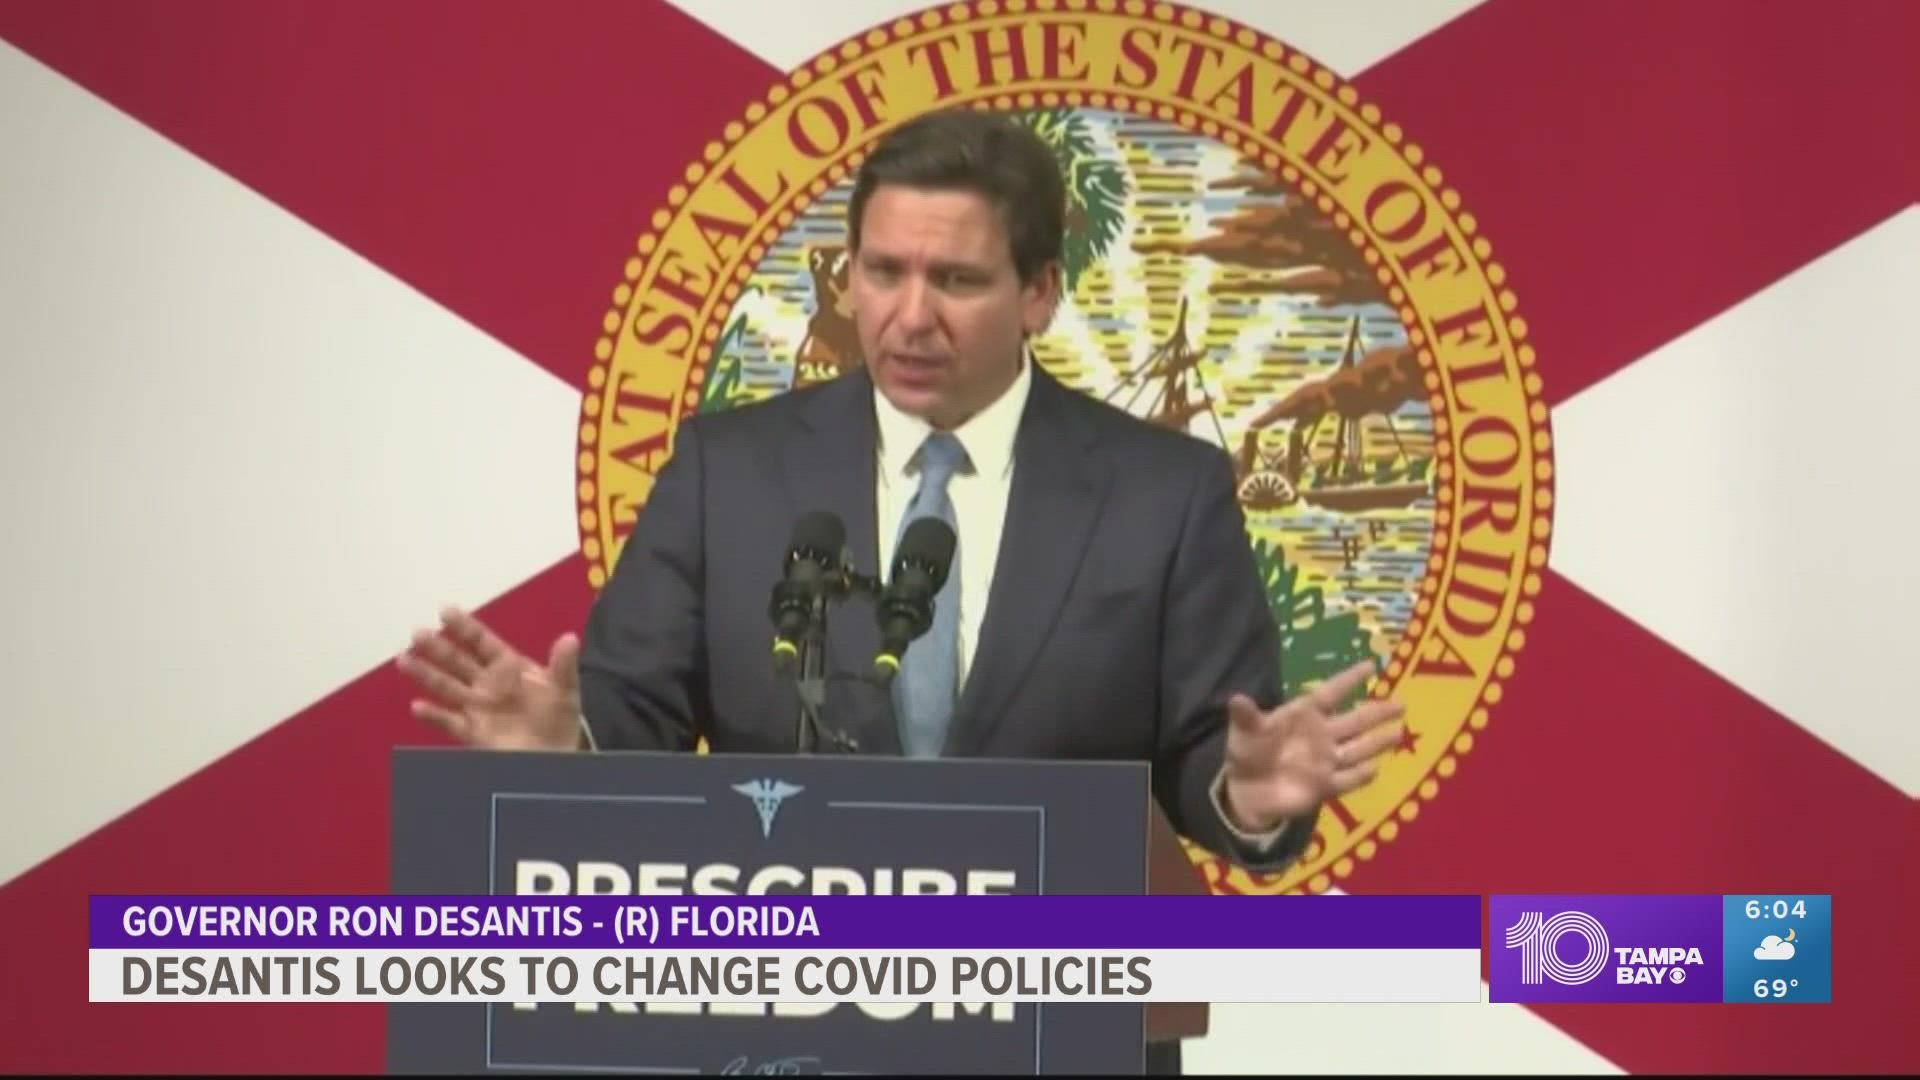 Florida Gov. Ron DeSantis' office says that he wants to see a law protecting physicians who speak out against COVID-19 policies from getting fired.